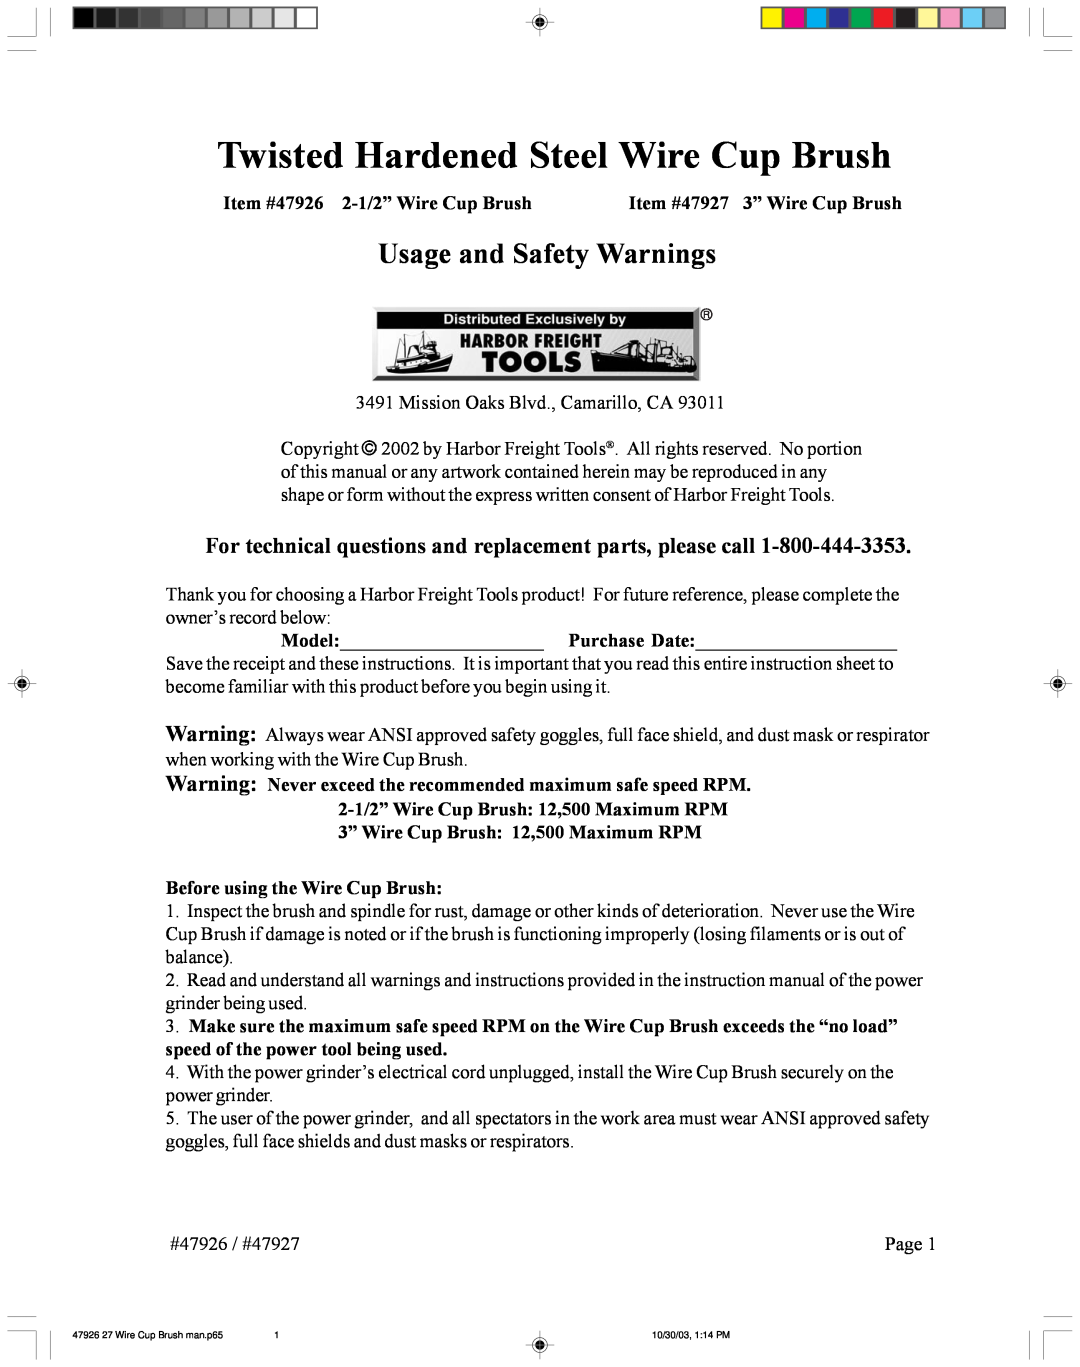 Harbor Freight Tools instruction sheet Item #47926 2-1/2”Wire Cup Brush, Item #47927 3” Wire Cup Brush 